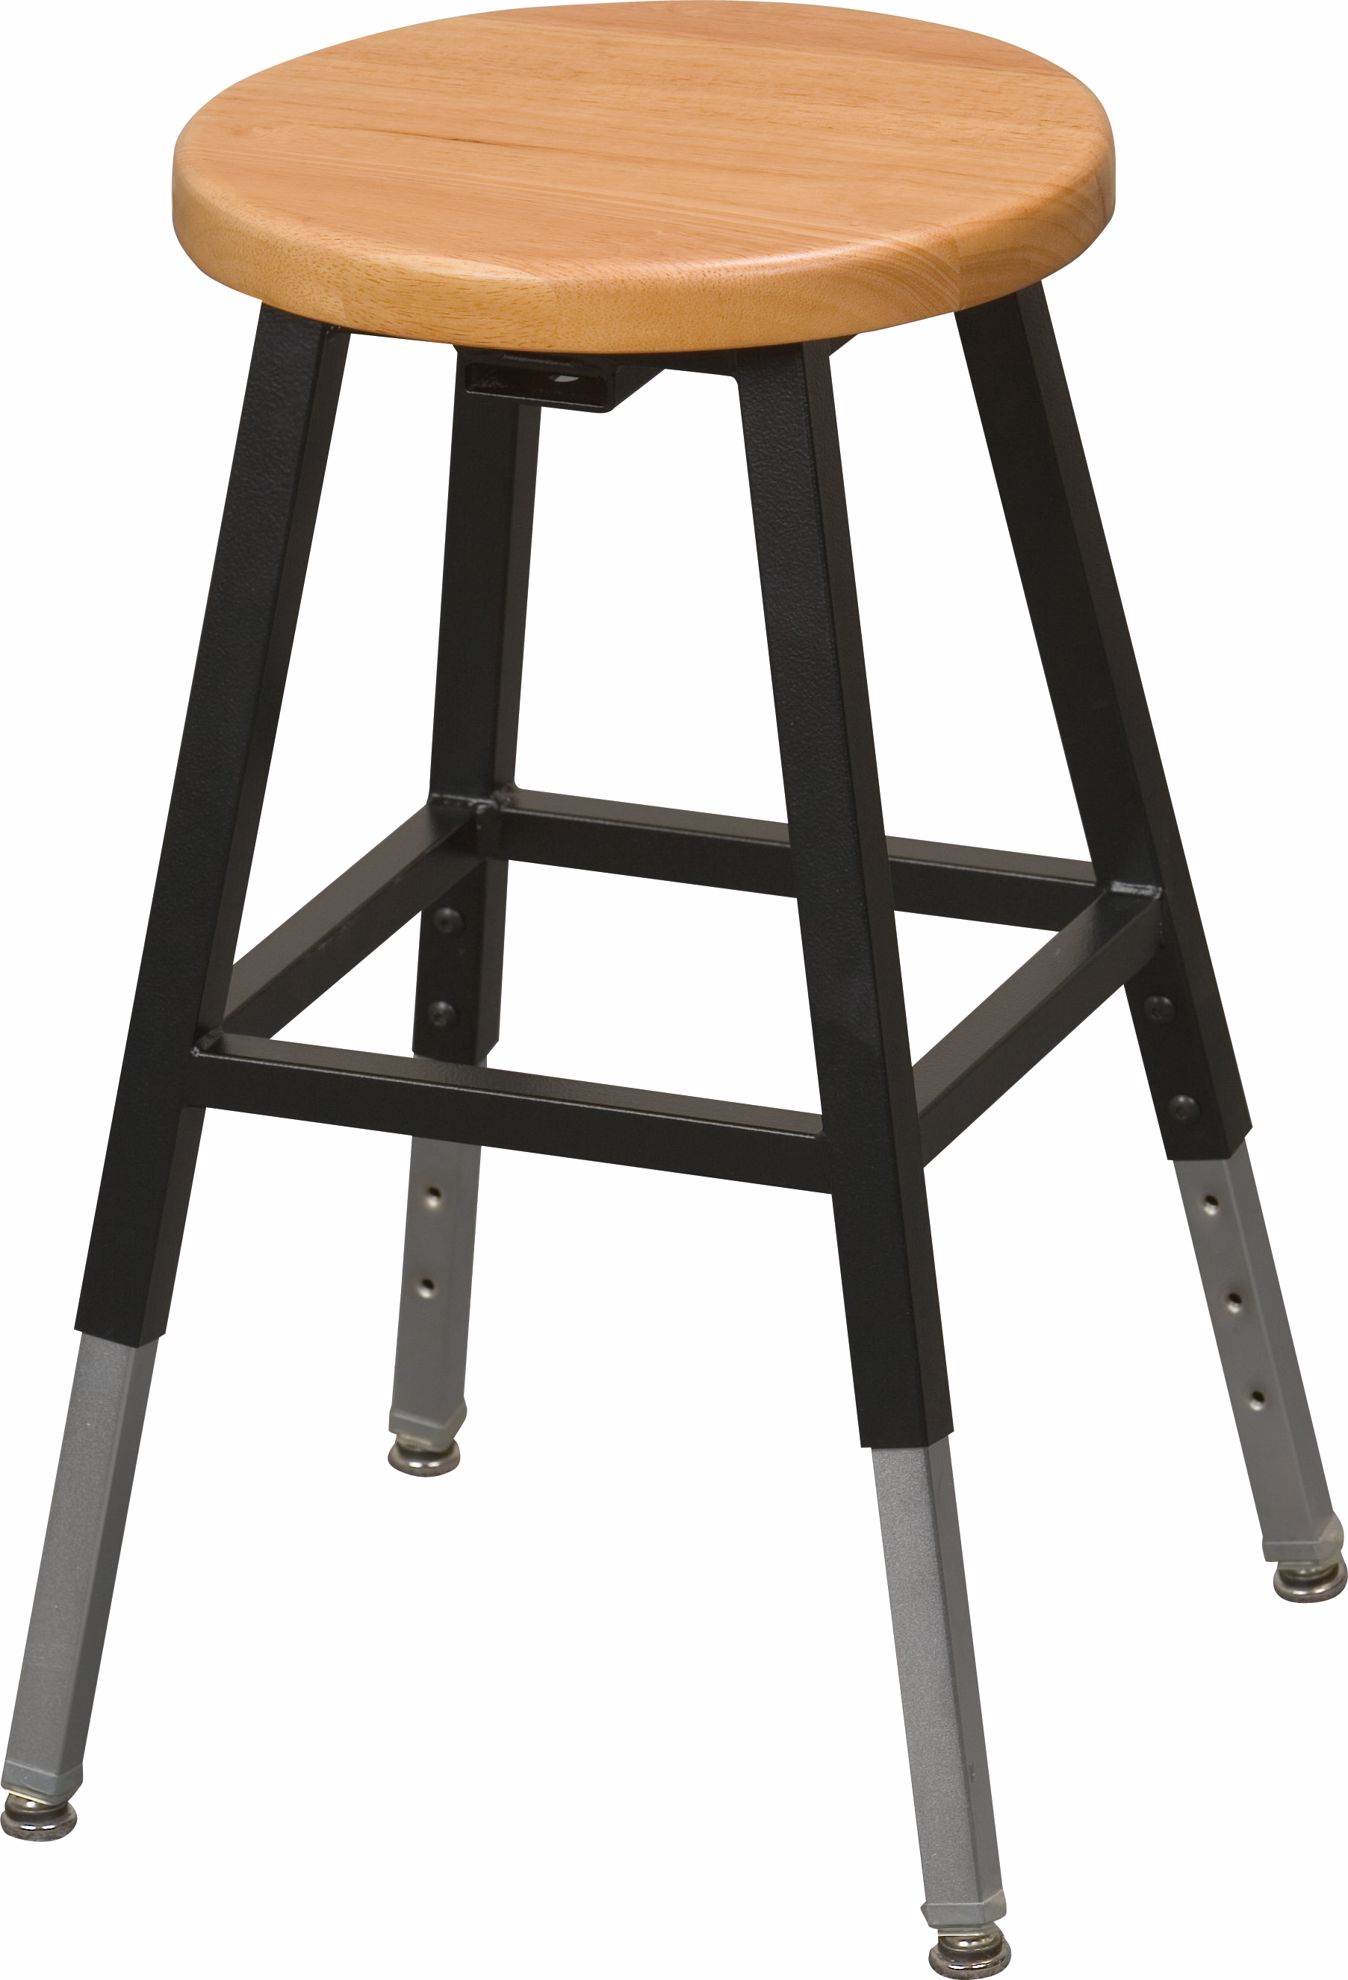 Lab Stools and Lab Chairs